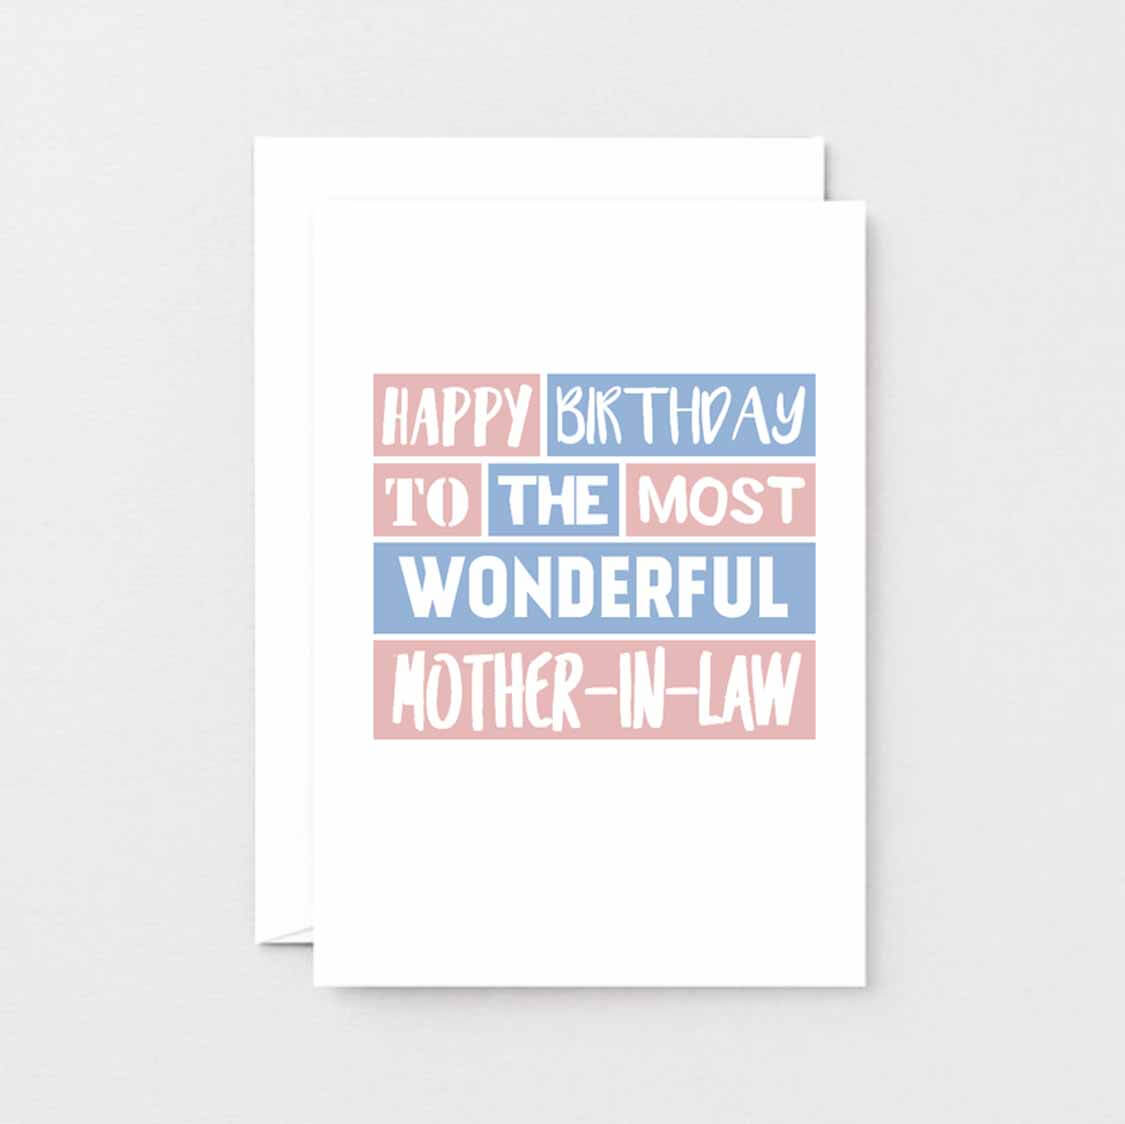 Mother-in-Law Birthday Card by SixElevenCreations. Reads Happy birthday to the most wonderful mother-in-law. Product Code SE0204A6